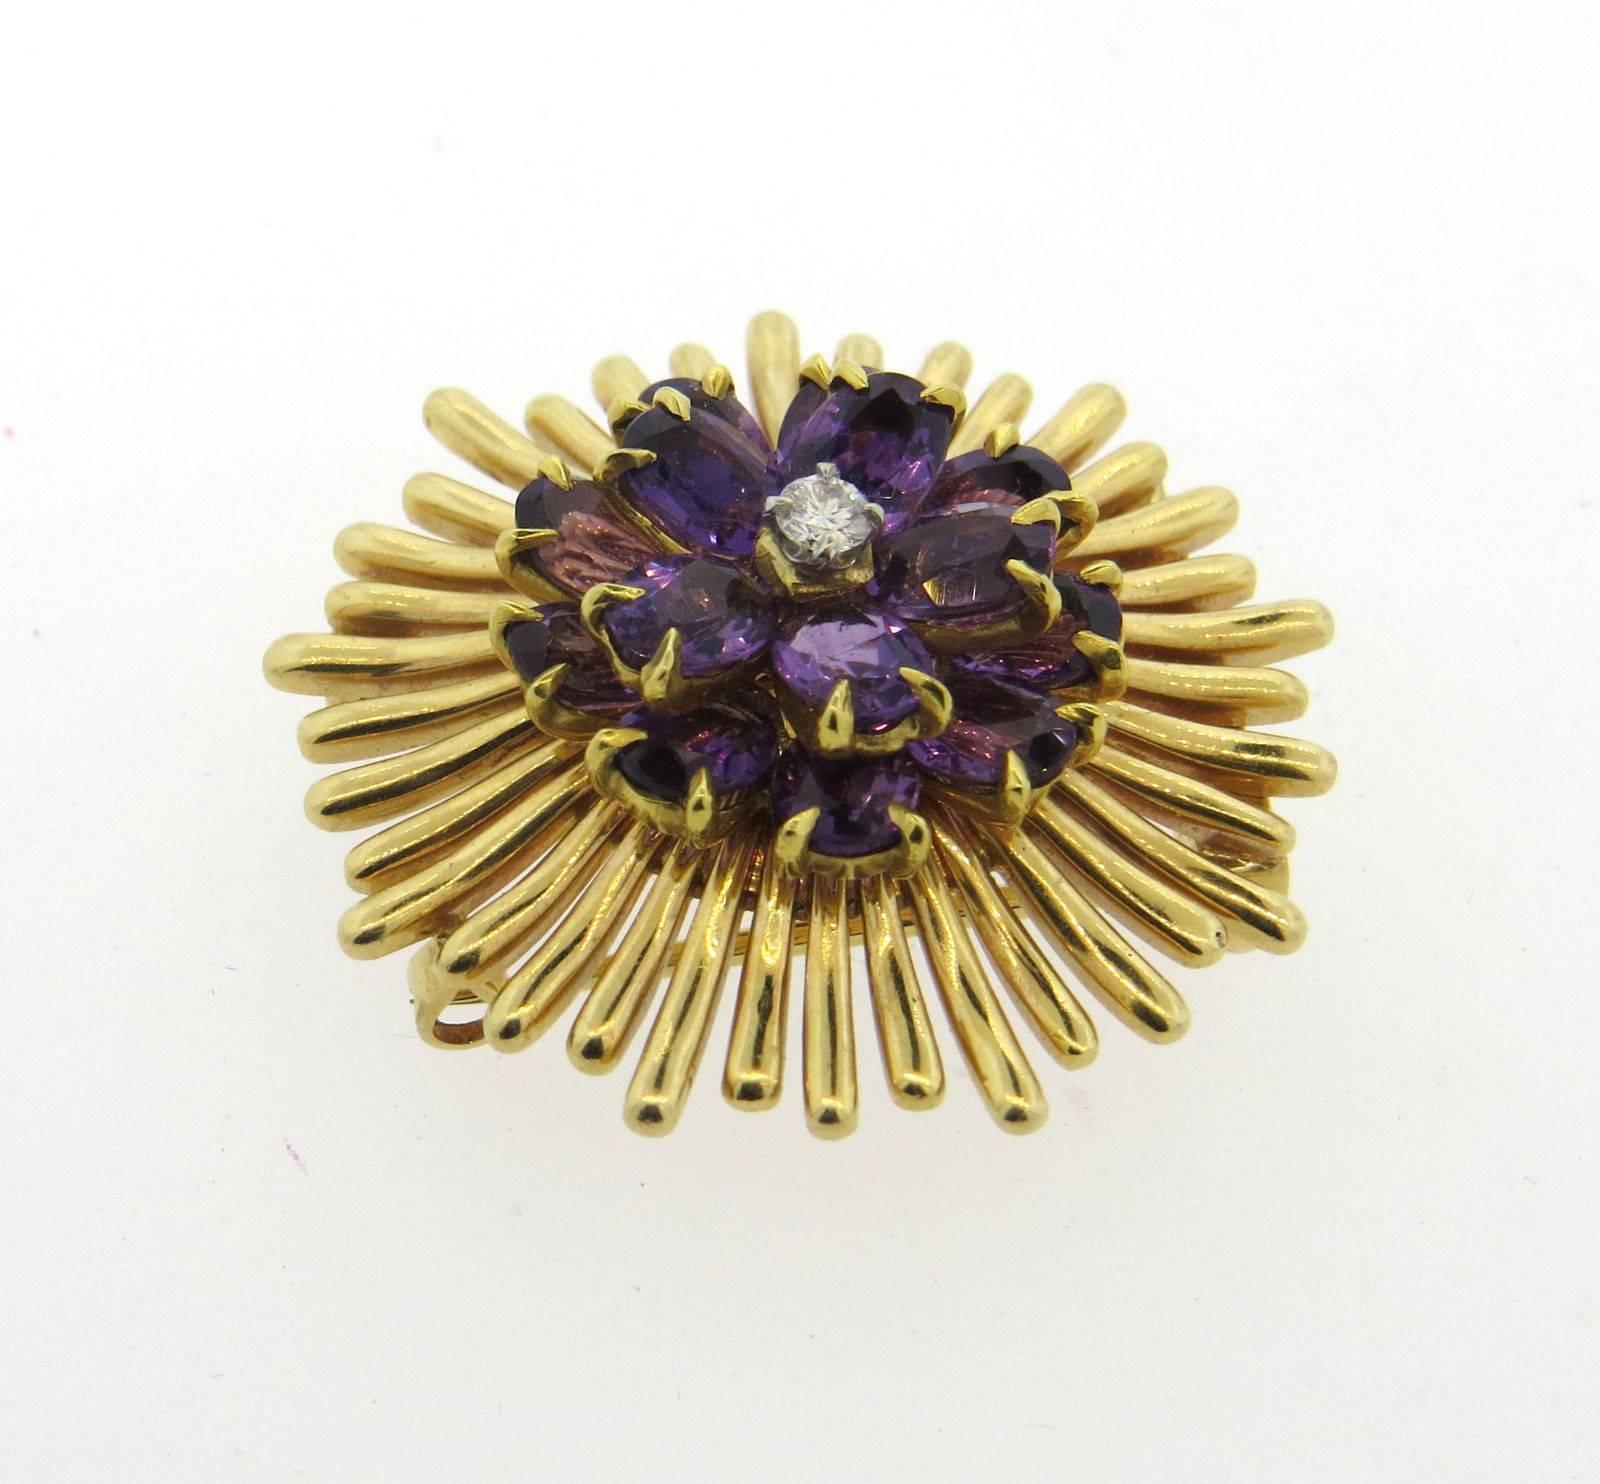 A 14k gold brooch pendant set with approximately 0.11ct of H/SI1 diamonds and amethyst. Brooch measures 31mm in diameter.  The weight of the piece is 19.6 grams. Can be worn as a slide /enhancer on the necklace. 